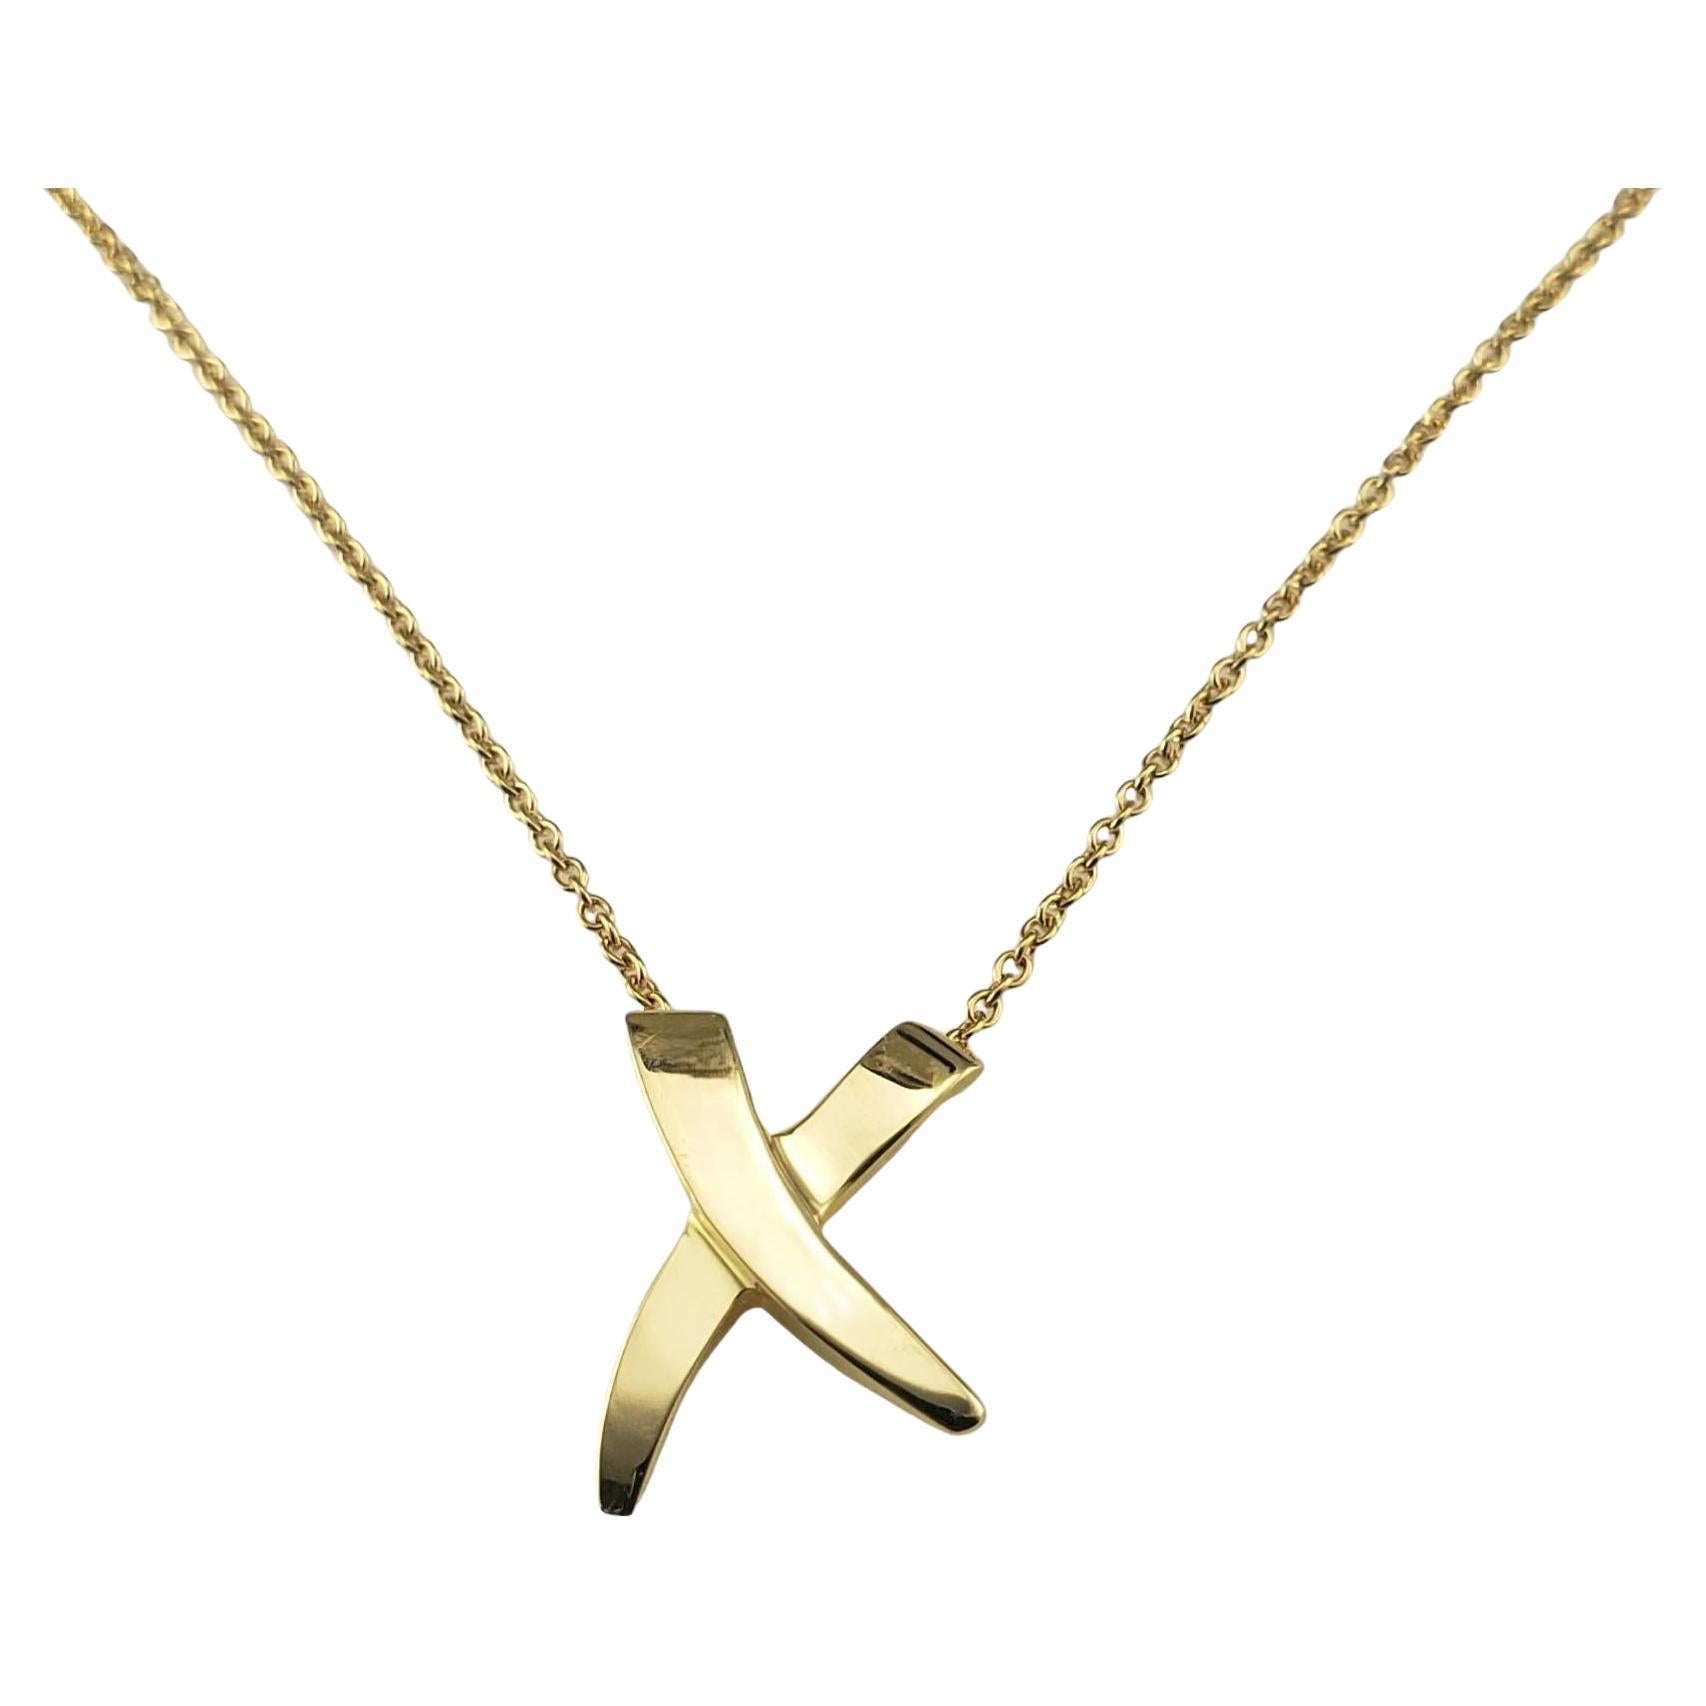 Tiffany & Co. Paloma Picasso 18K Yellow Gold Graffiti "X" Necklace #17223 For Sale